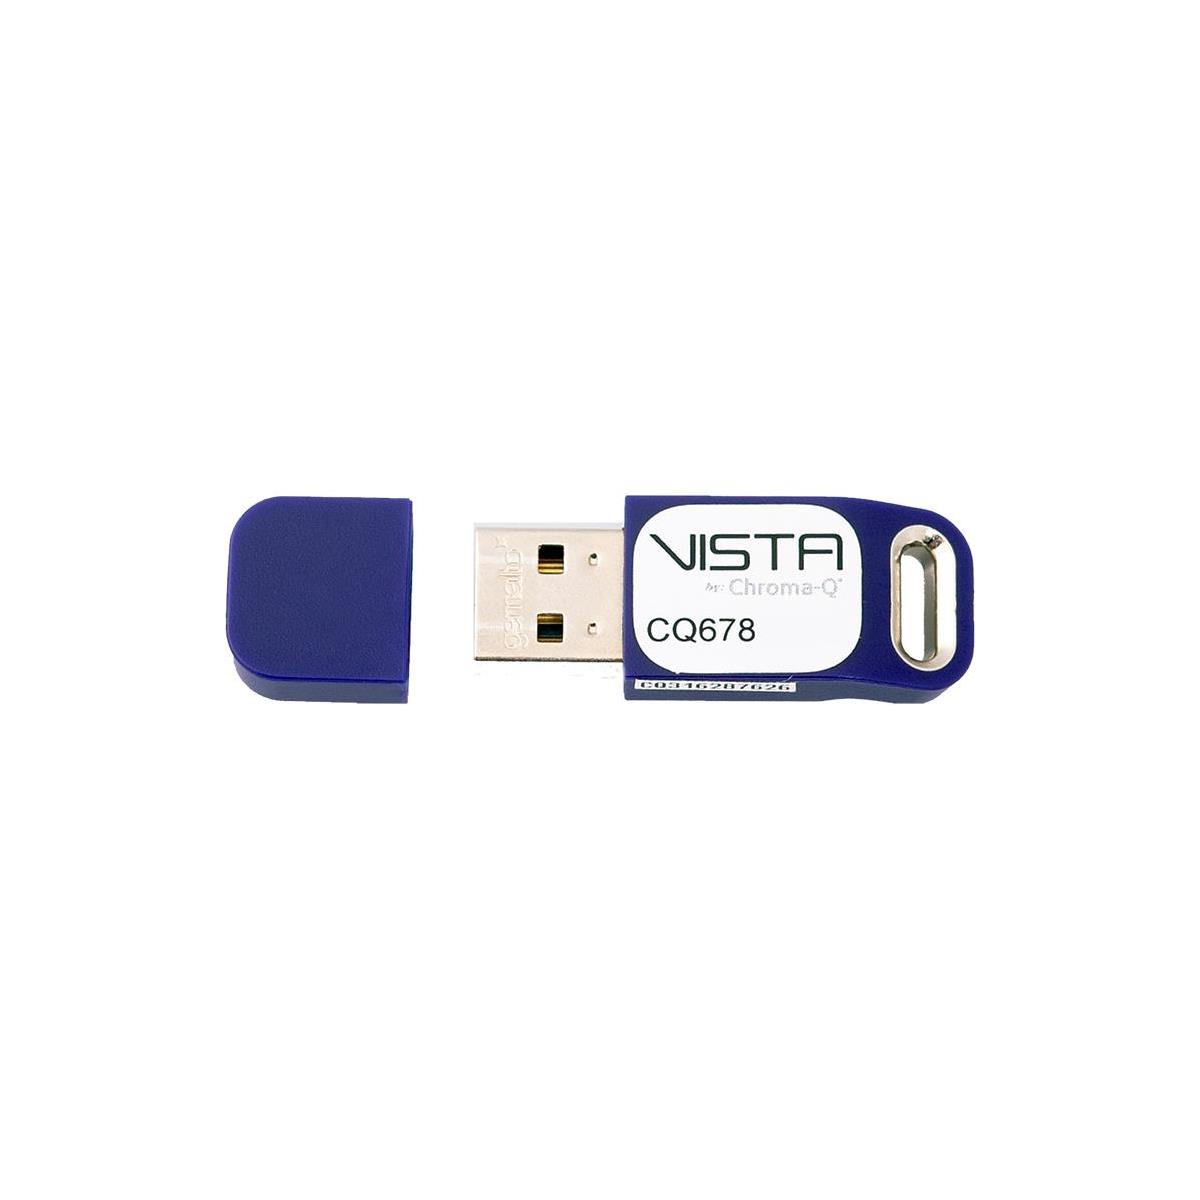 Image of Chroma-Q Vista 256-Channel Dongle